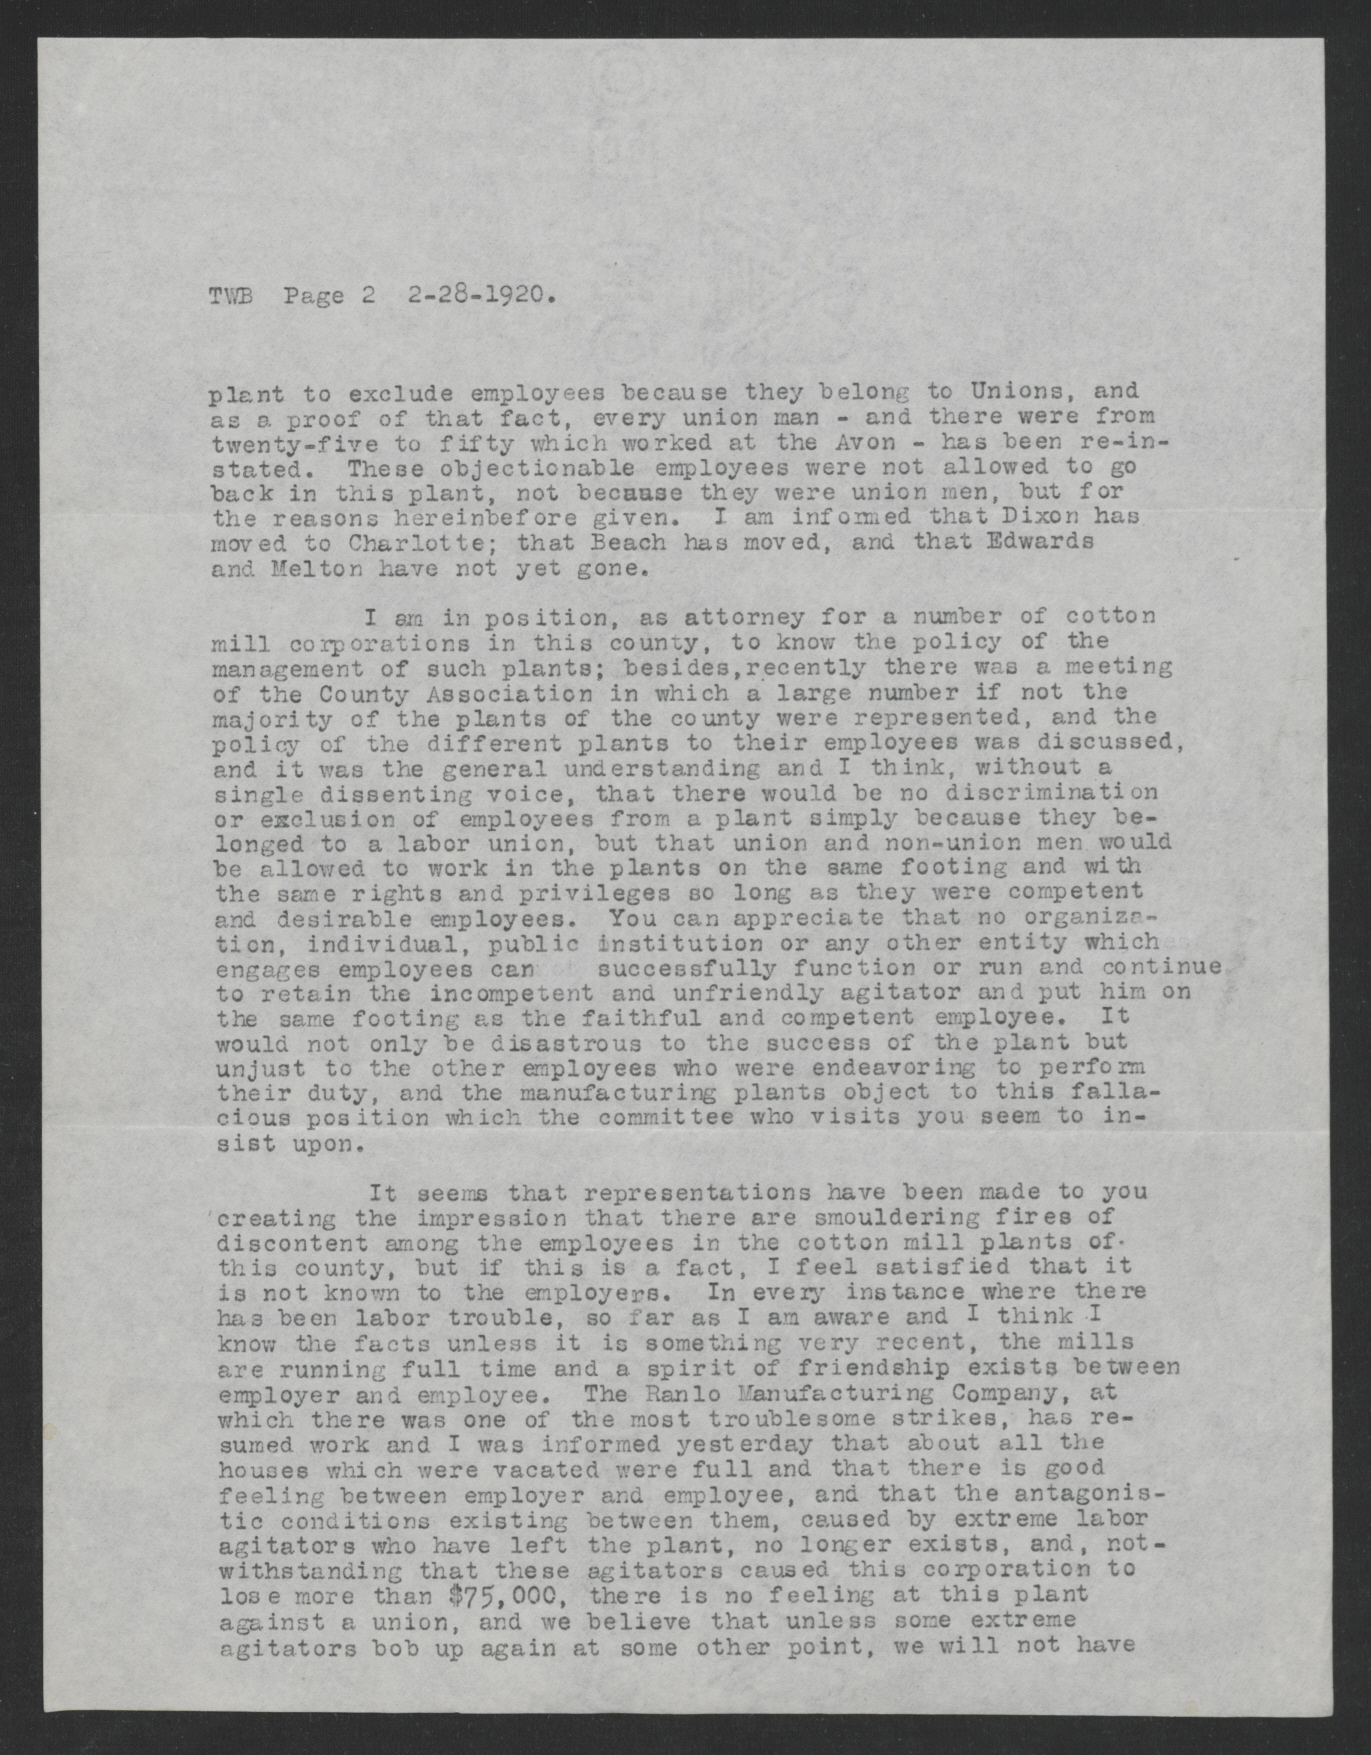 Letter from Addison G. Mangum to Thomas W. Bickett, February 28, 1920, page 2